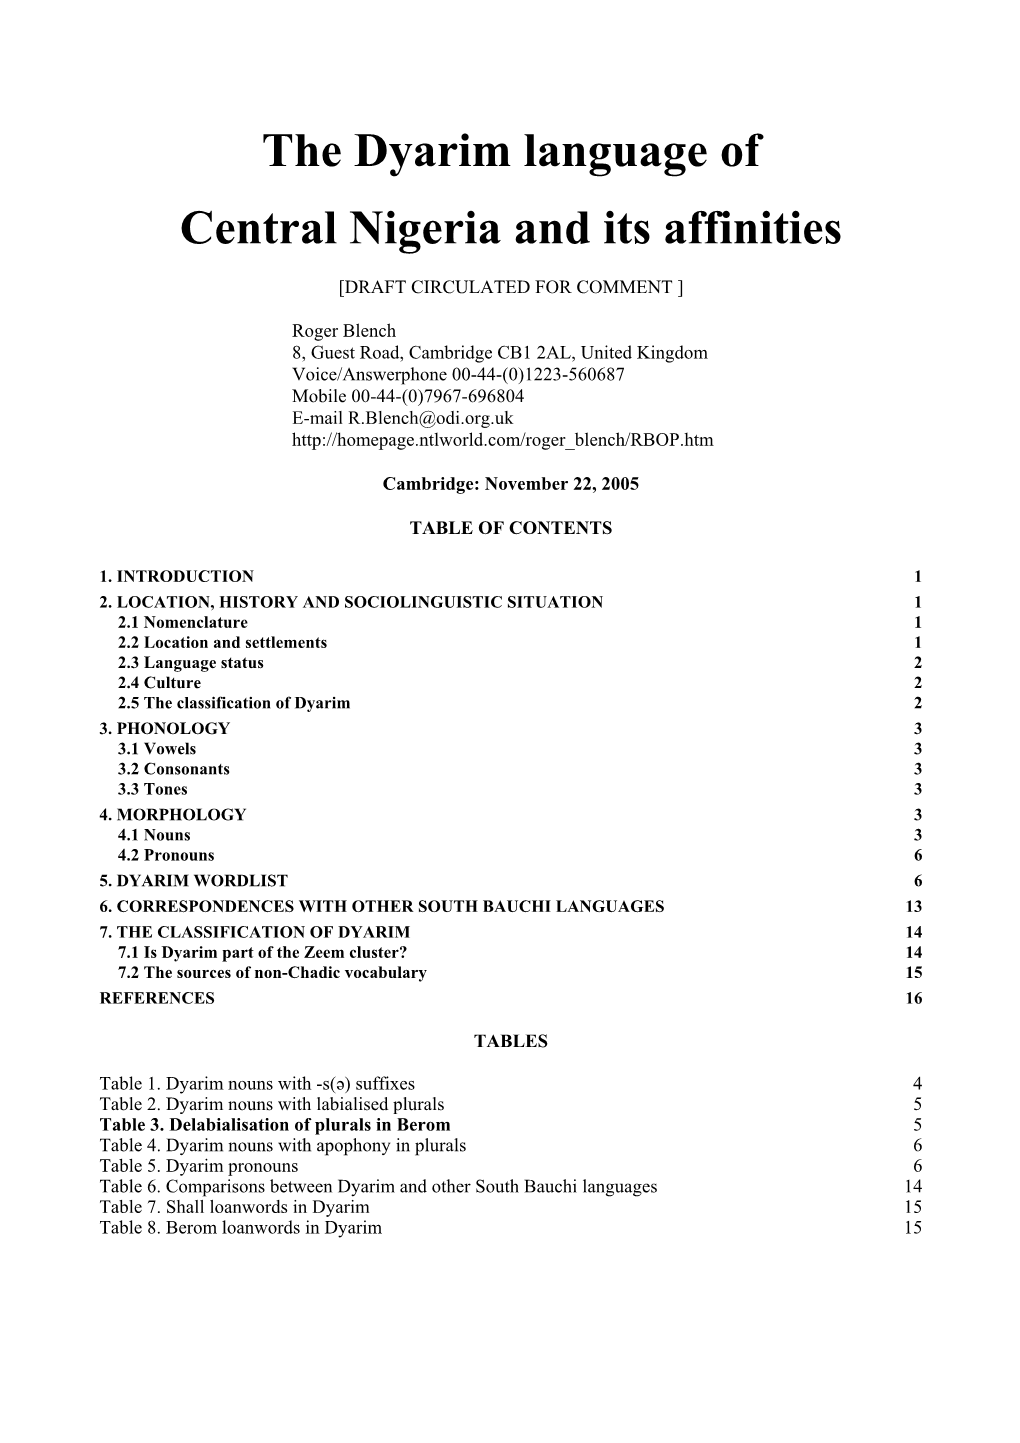 The Dyarim Language of Central Nigeria and Its Affinities